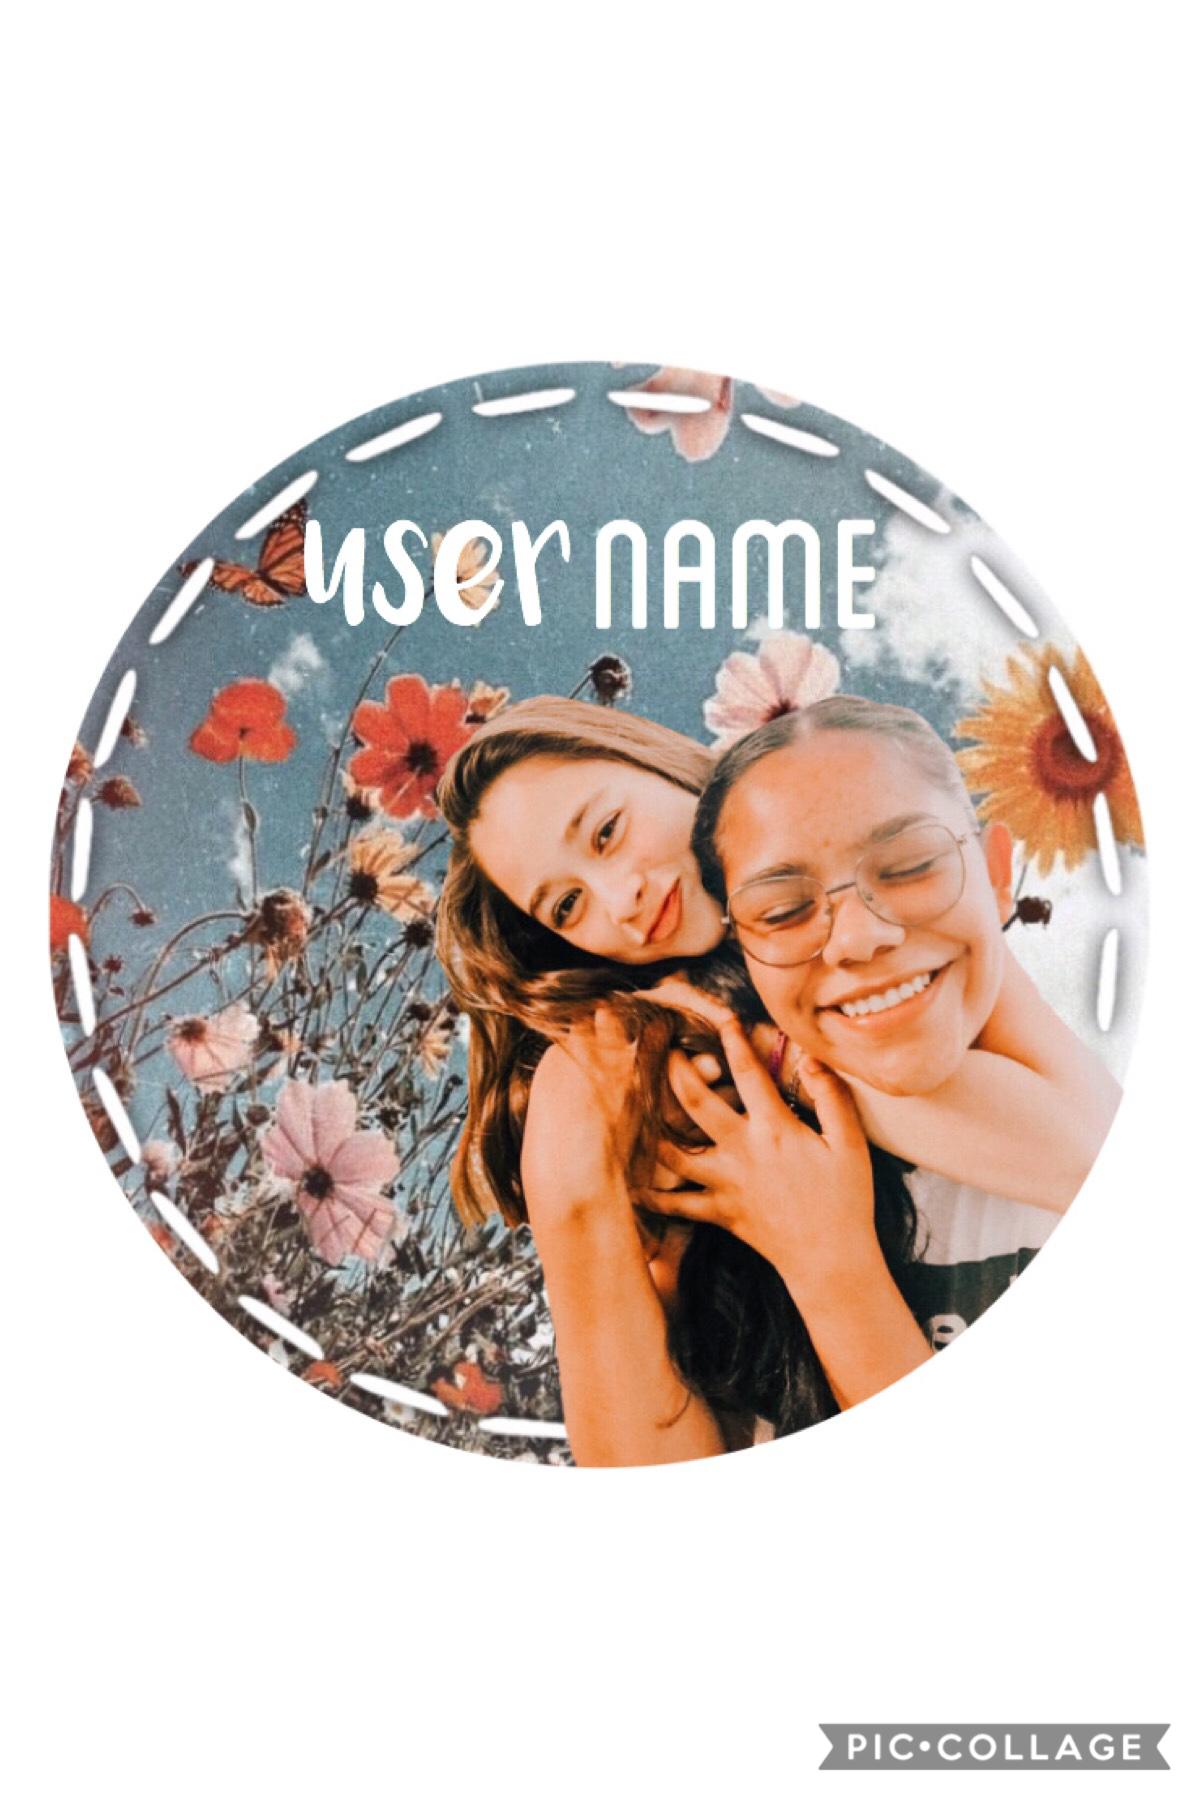 tap

🦋 if you stunning creations of god want this icon just tell me and ill be more than happy to put your username on it 🦋